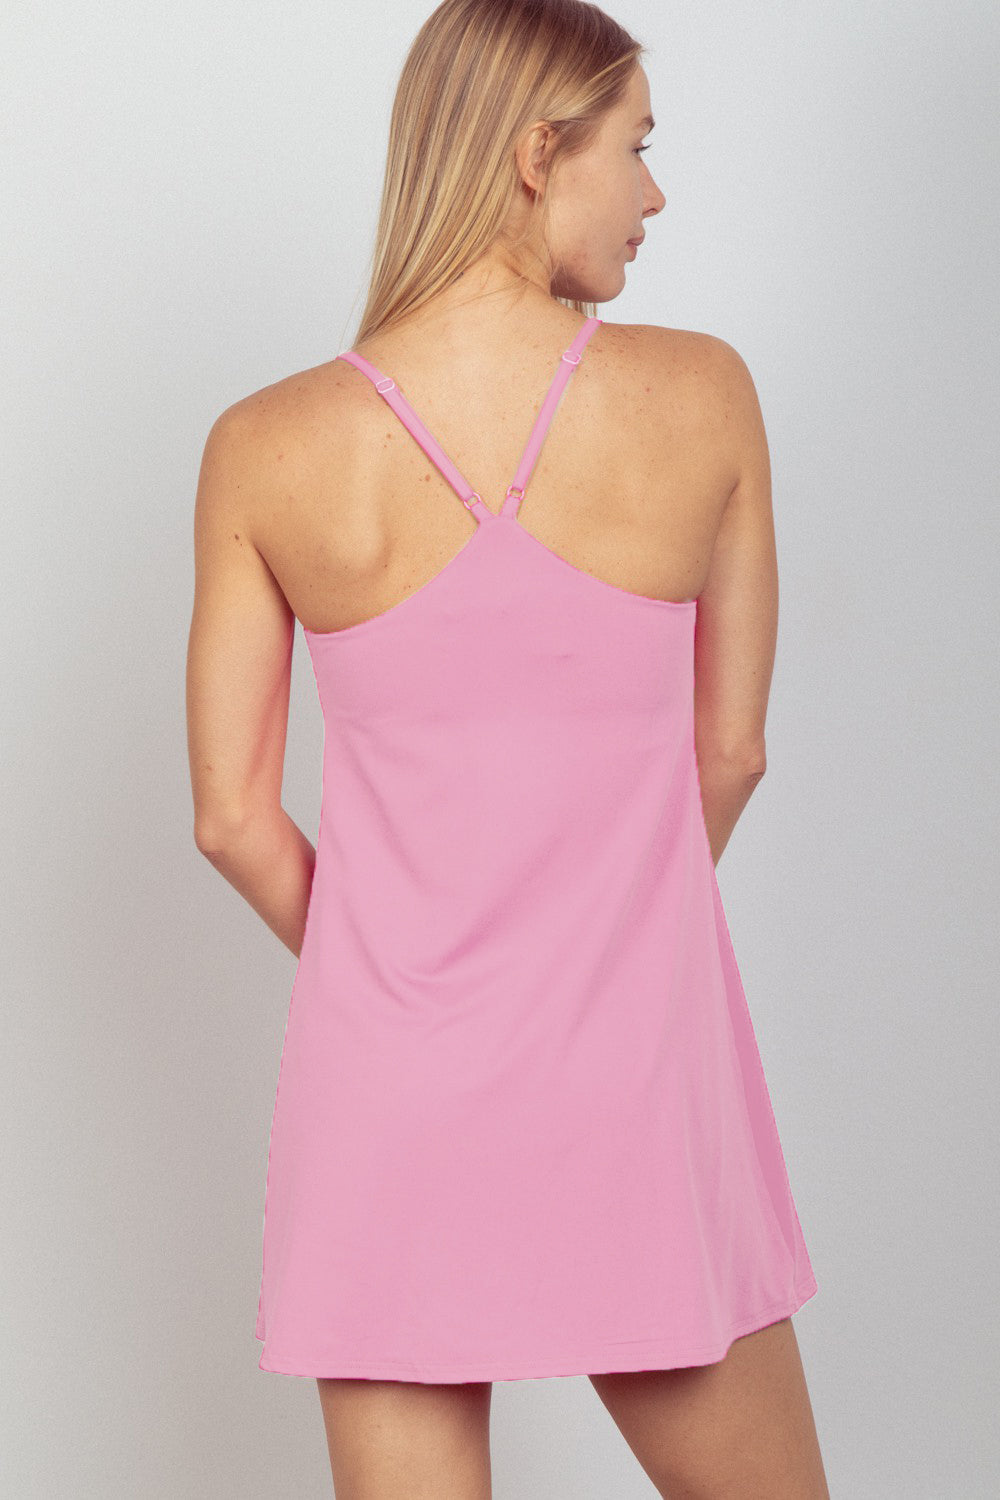 Mauve Tennis Dress with Shorts Liner